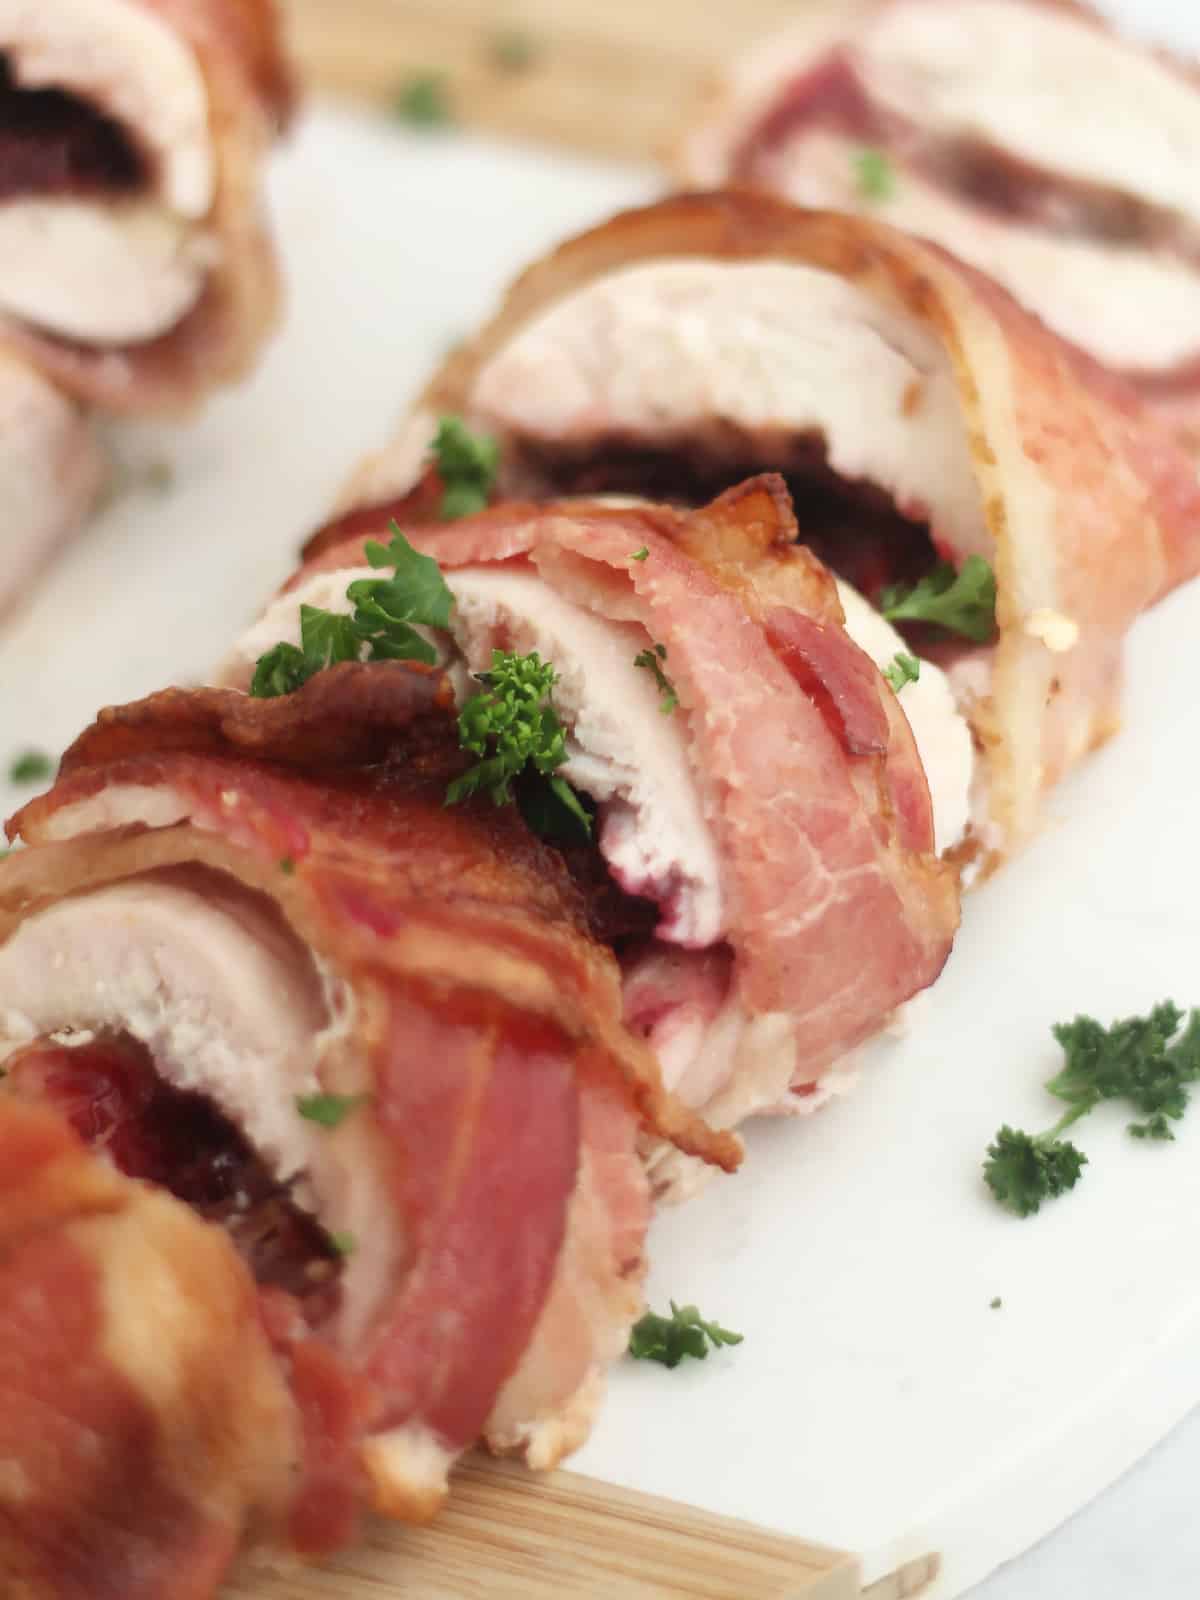 Sliced chicken breast wrapped n bacon and garnished with parsely.